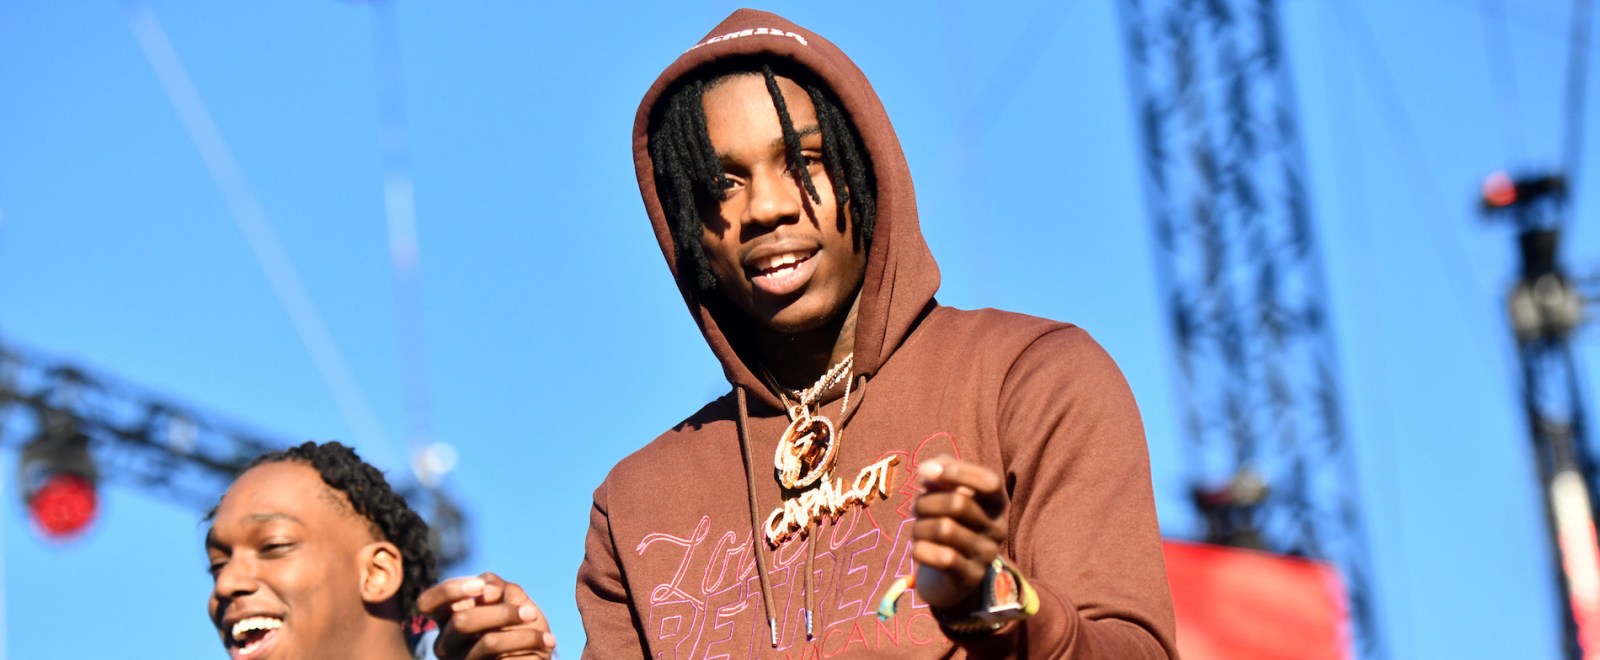 Polo G's Rapstar Song Debuts At Number 1 On The Hot 100 Chart!